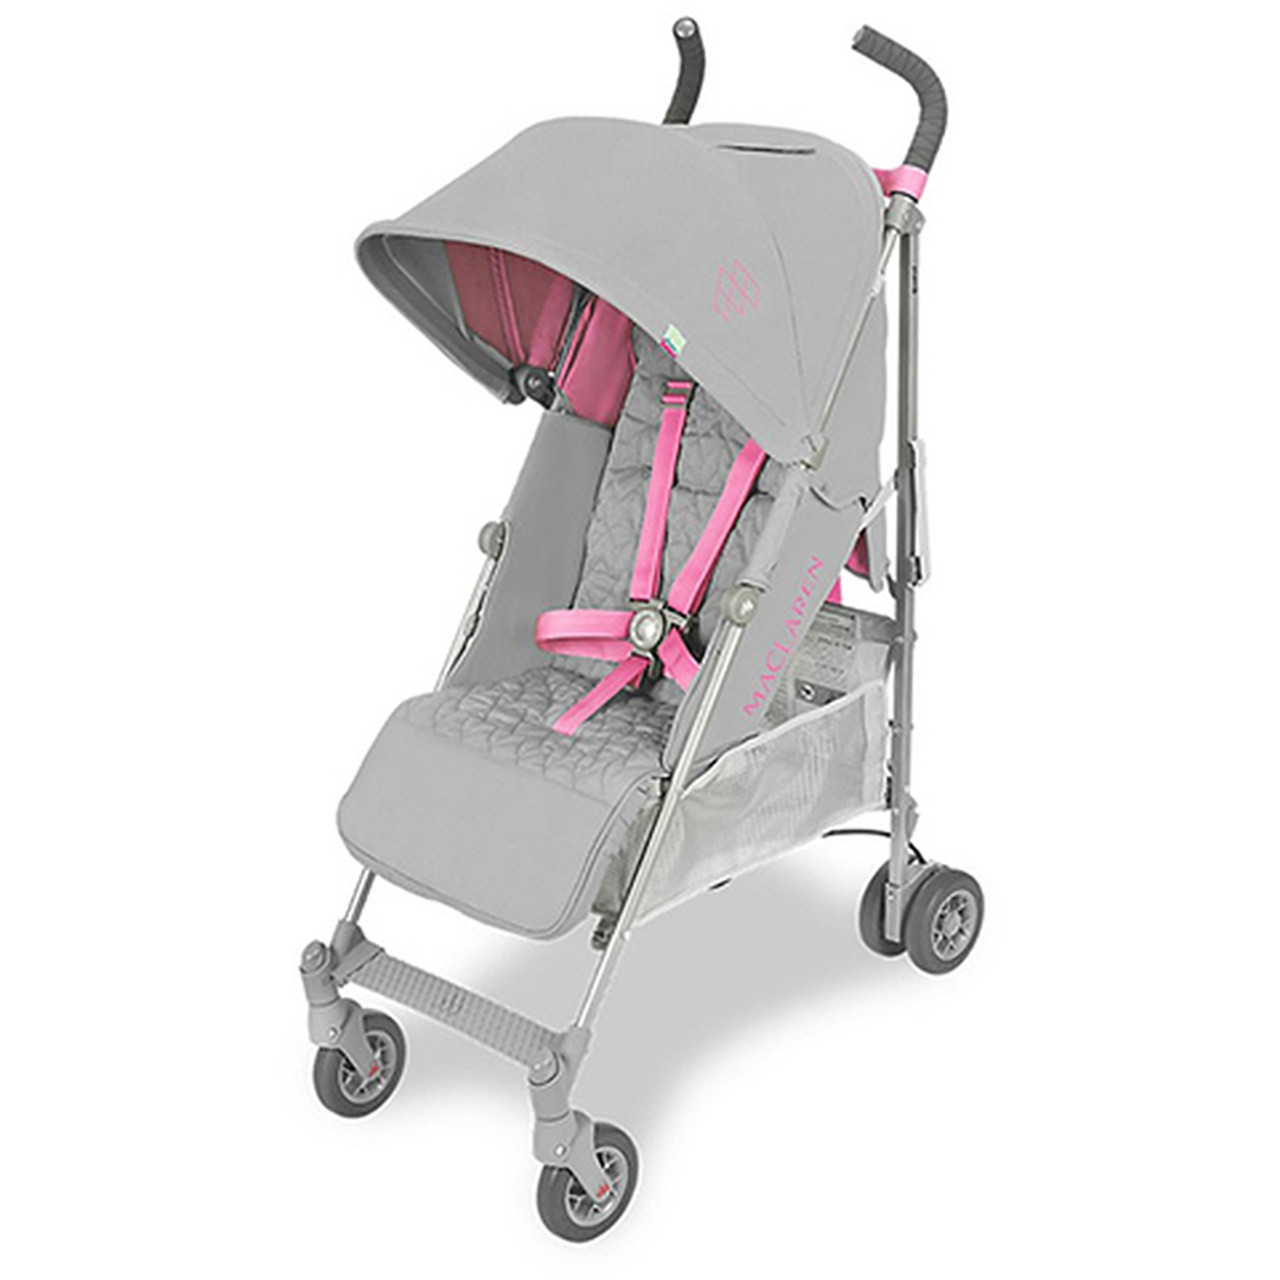 eurobaby strollers